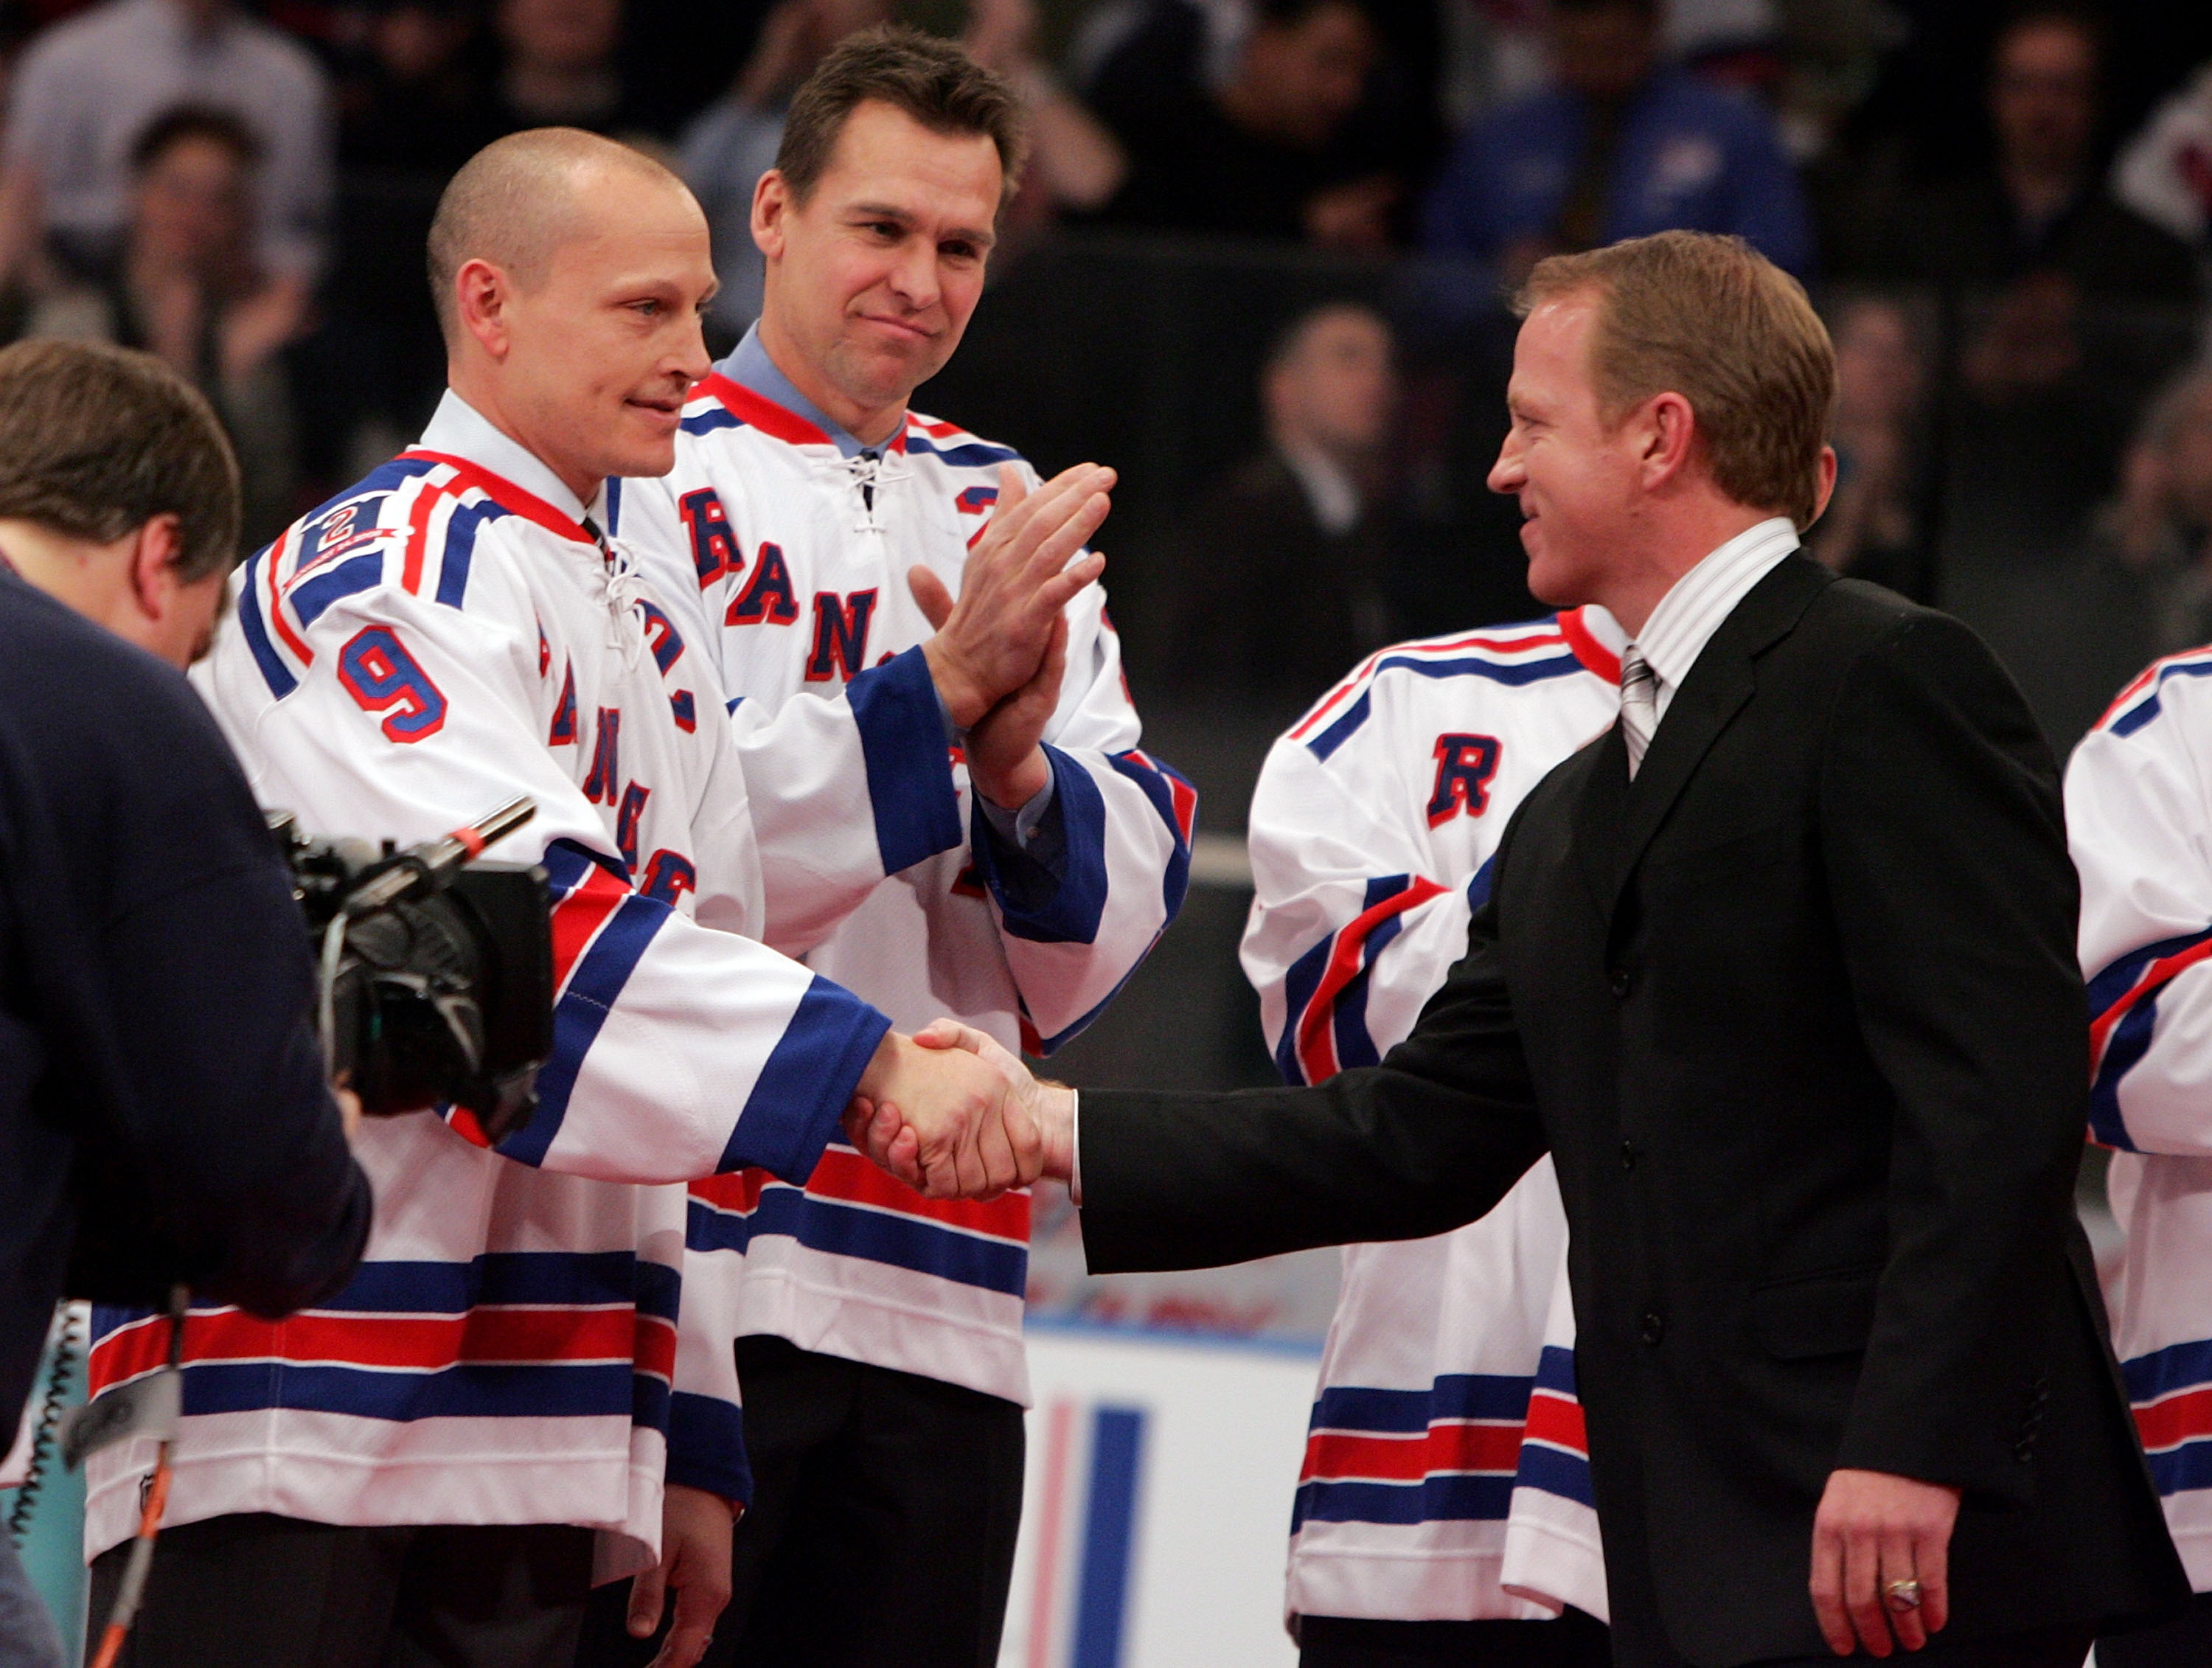 NEW YORK - JANUARY 24: Former New York Ranger Brian Leetch shakes hands with former teammate Adam Graves during his jersey retirment ceremony before the game against the Atlanta Thrashers on January 24, 2008 at Madison Square Garden in New York City.Leetch made a surprise announcement during his speech that the Rangers would retire Graves' number next season.Leetch became the fifth Ranger in history to have his number retired. (Photo by Jim McIsaac/Getty Images)